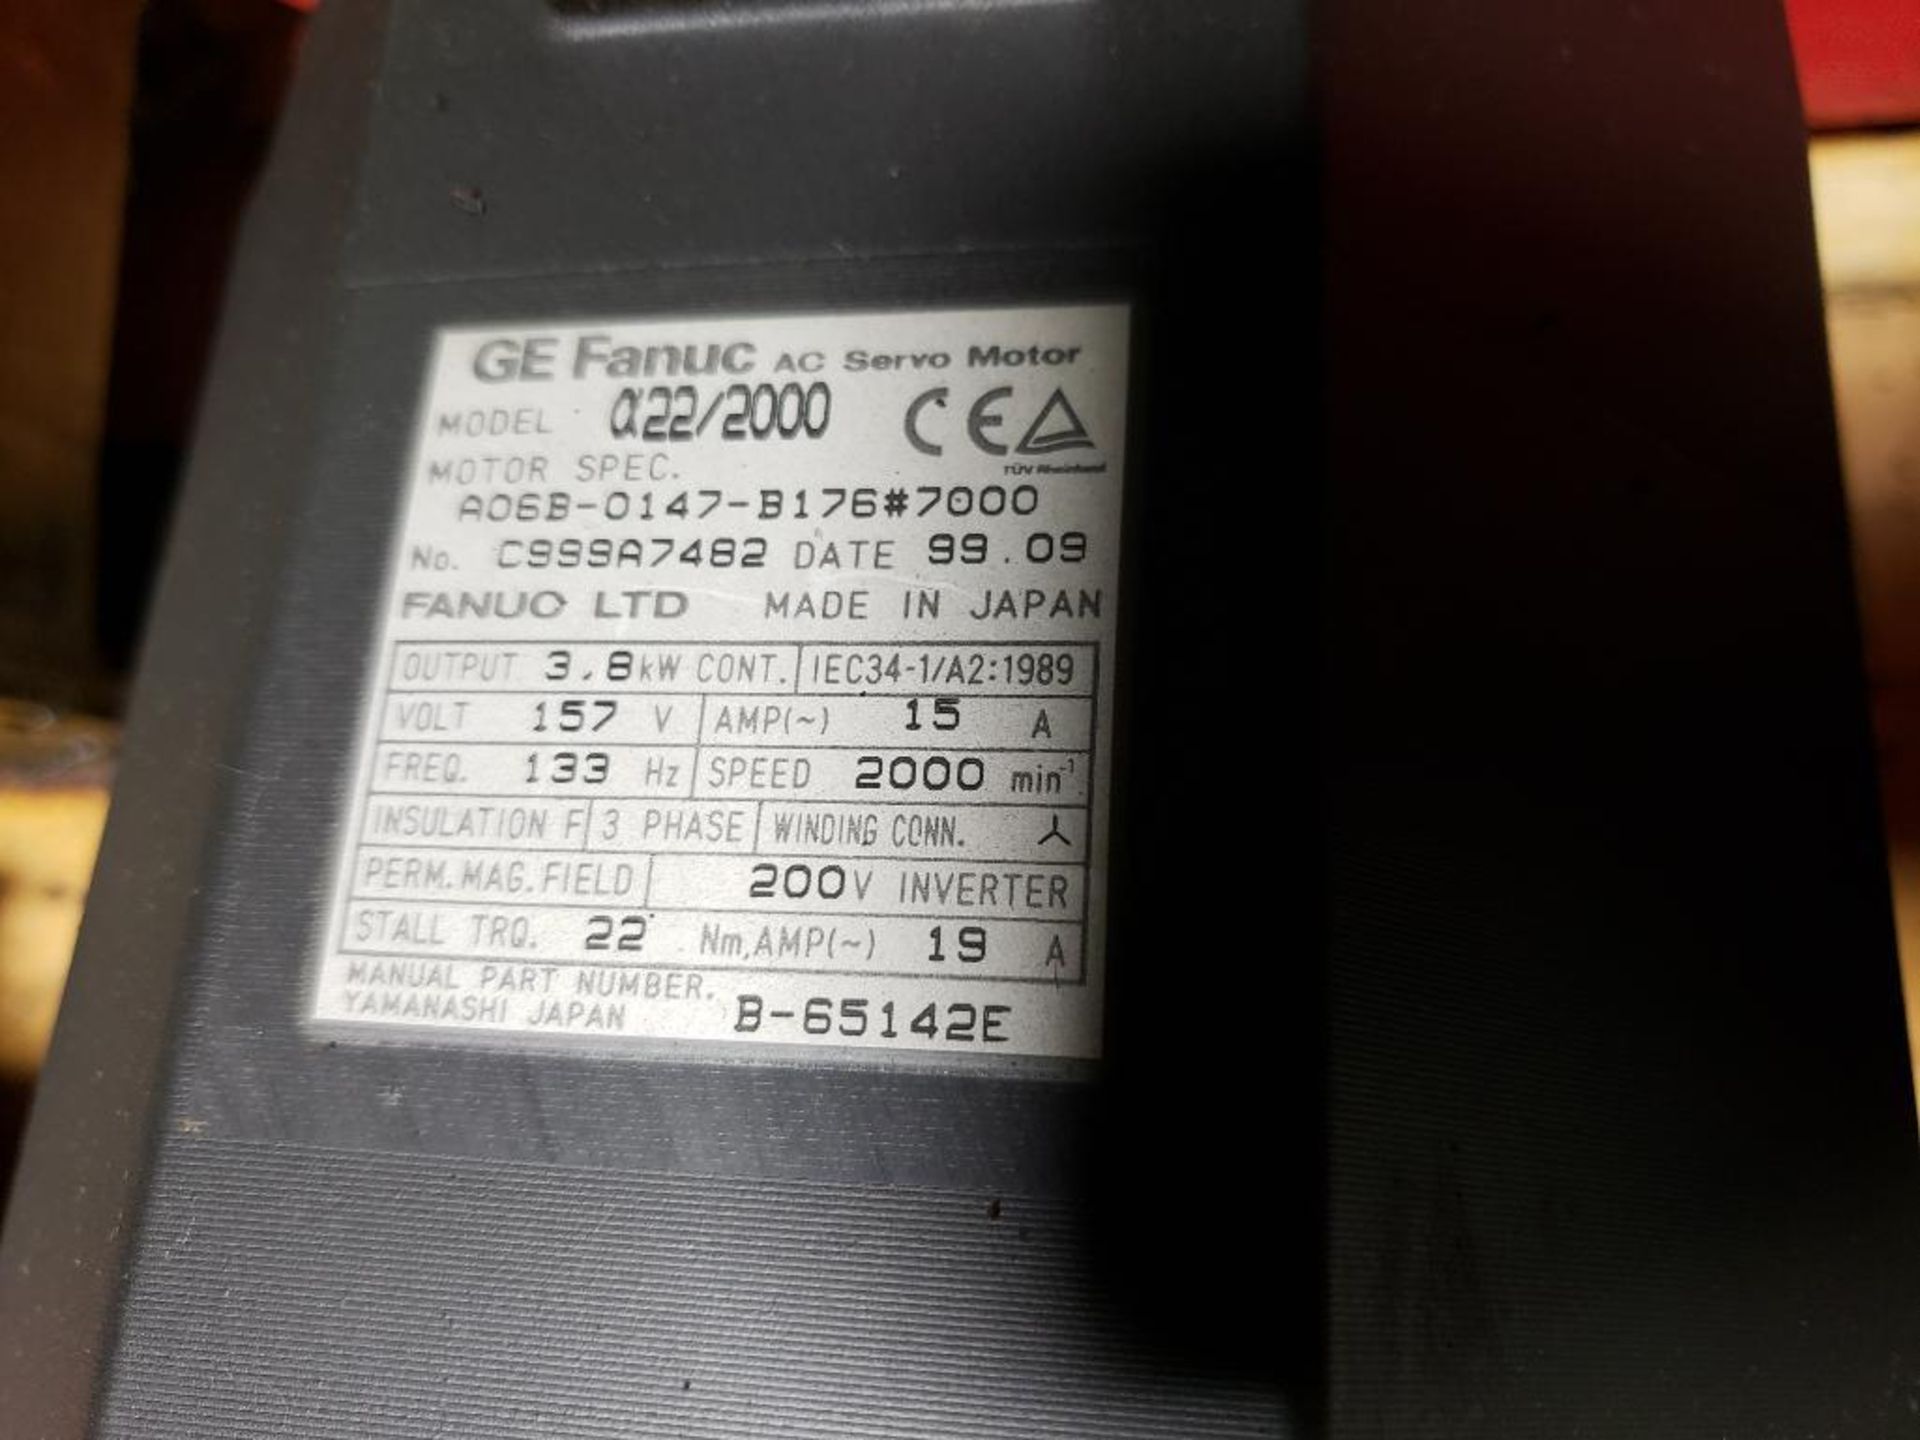 3.8kW GE Fanuc AC servo motor. A06B-0147-B176. 157V, 15AMP, 133Hz, 2000RPM. - Image 3 of 3